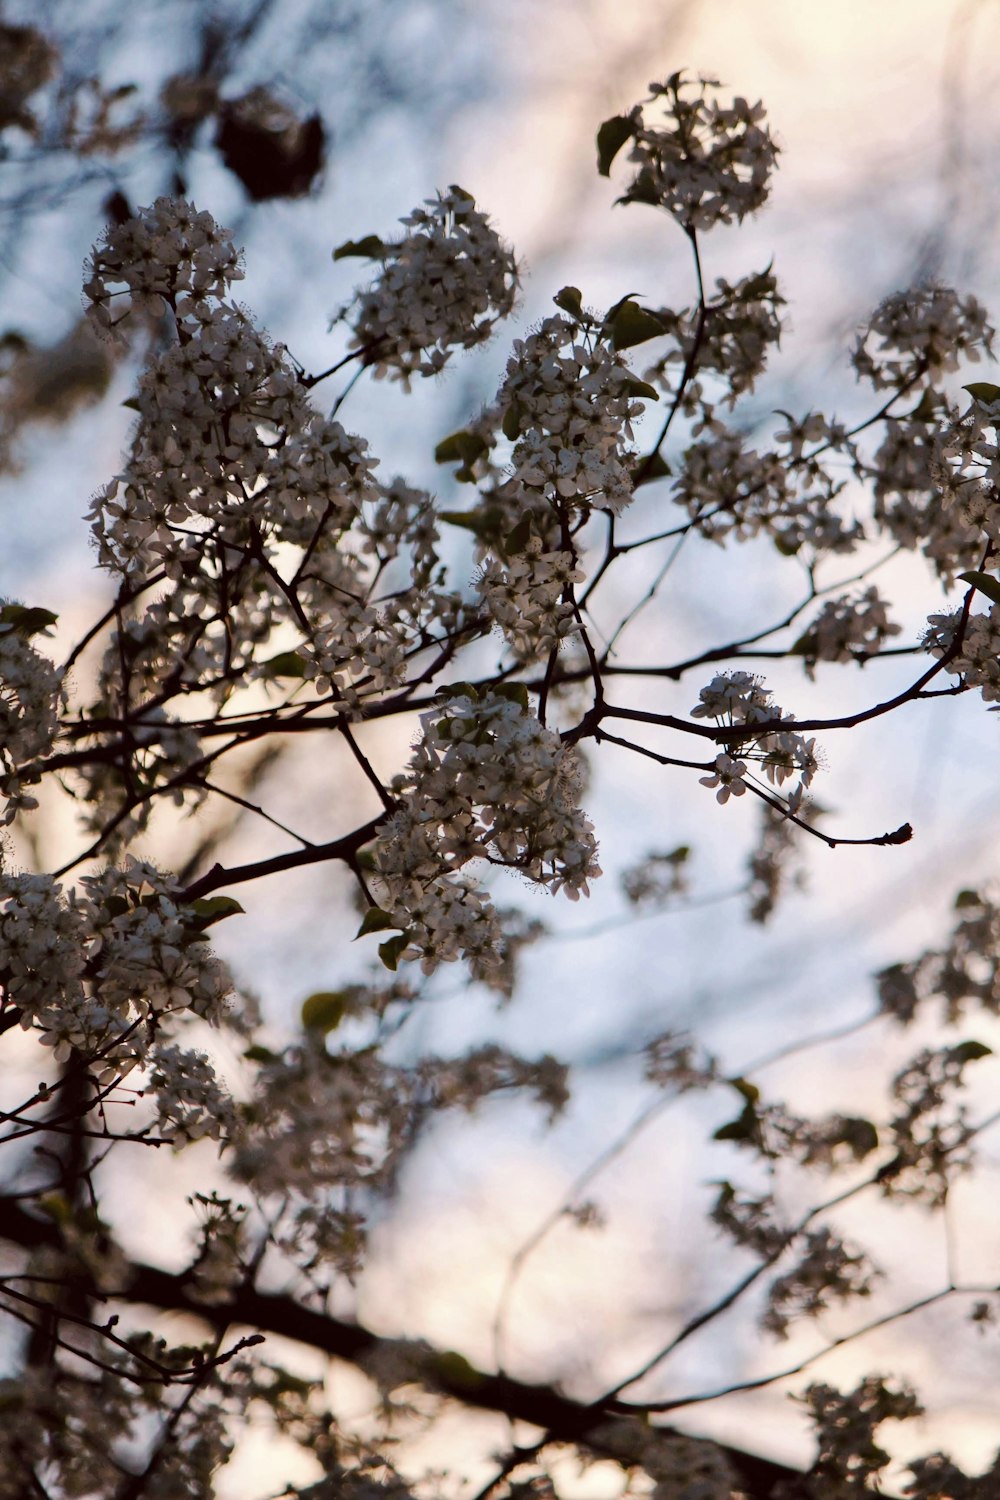 a tree branch with white flowers in the foreground